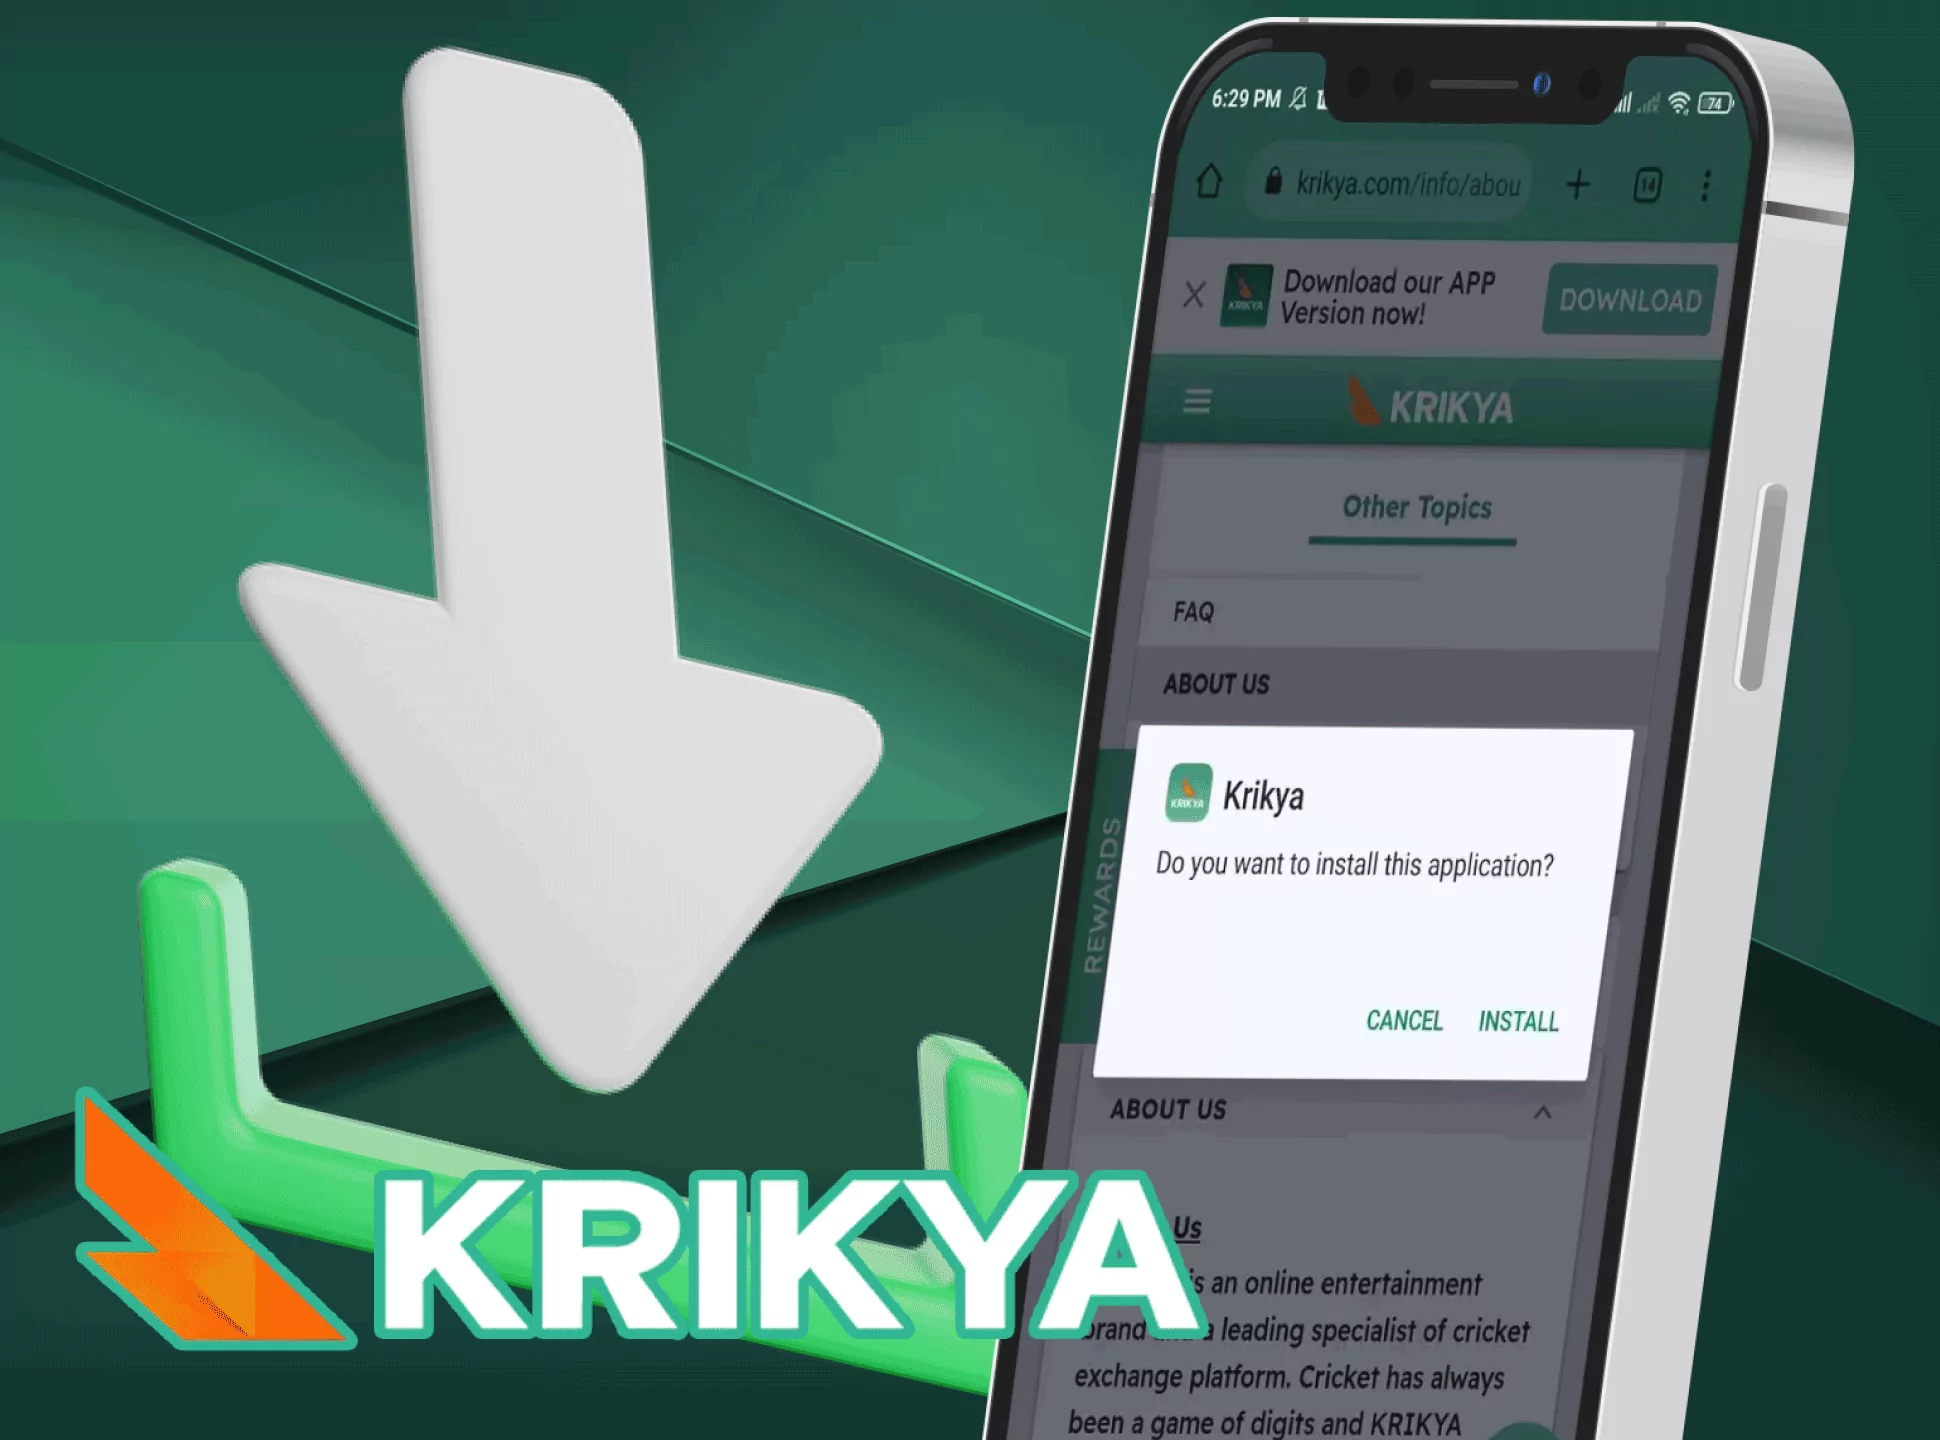 Download the apk file from the Krikya website.